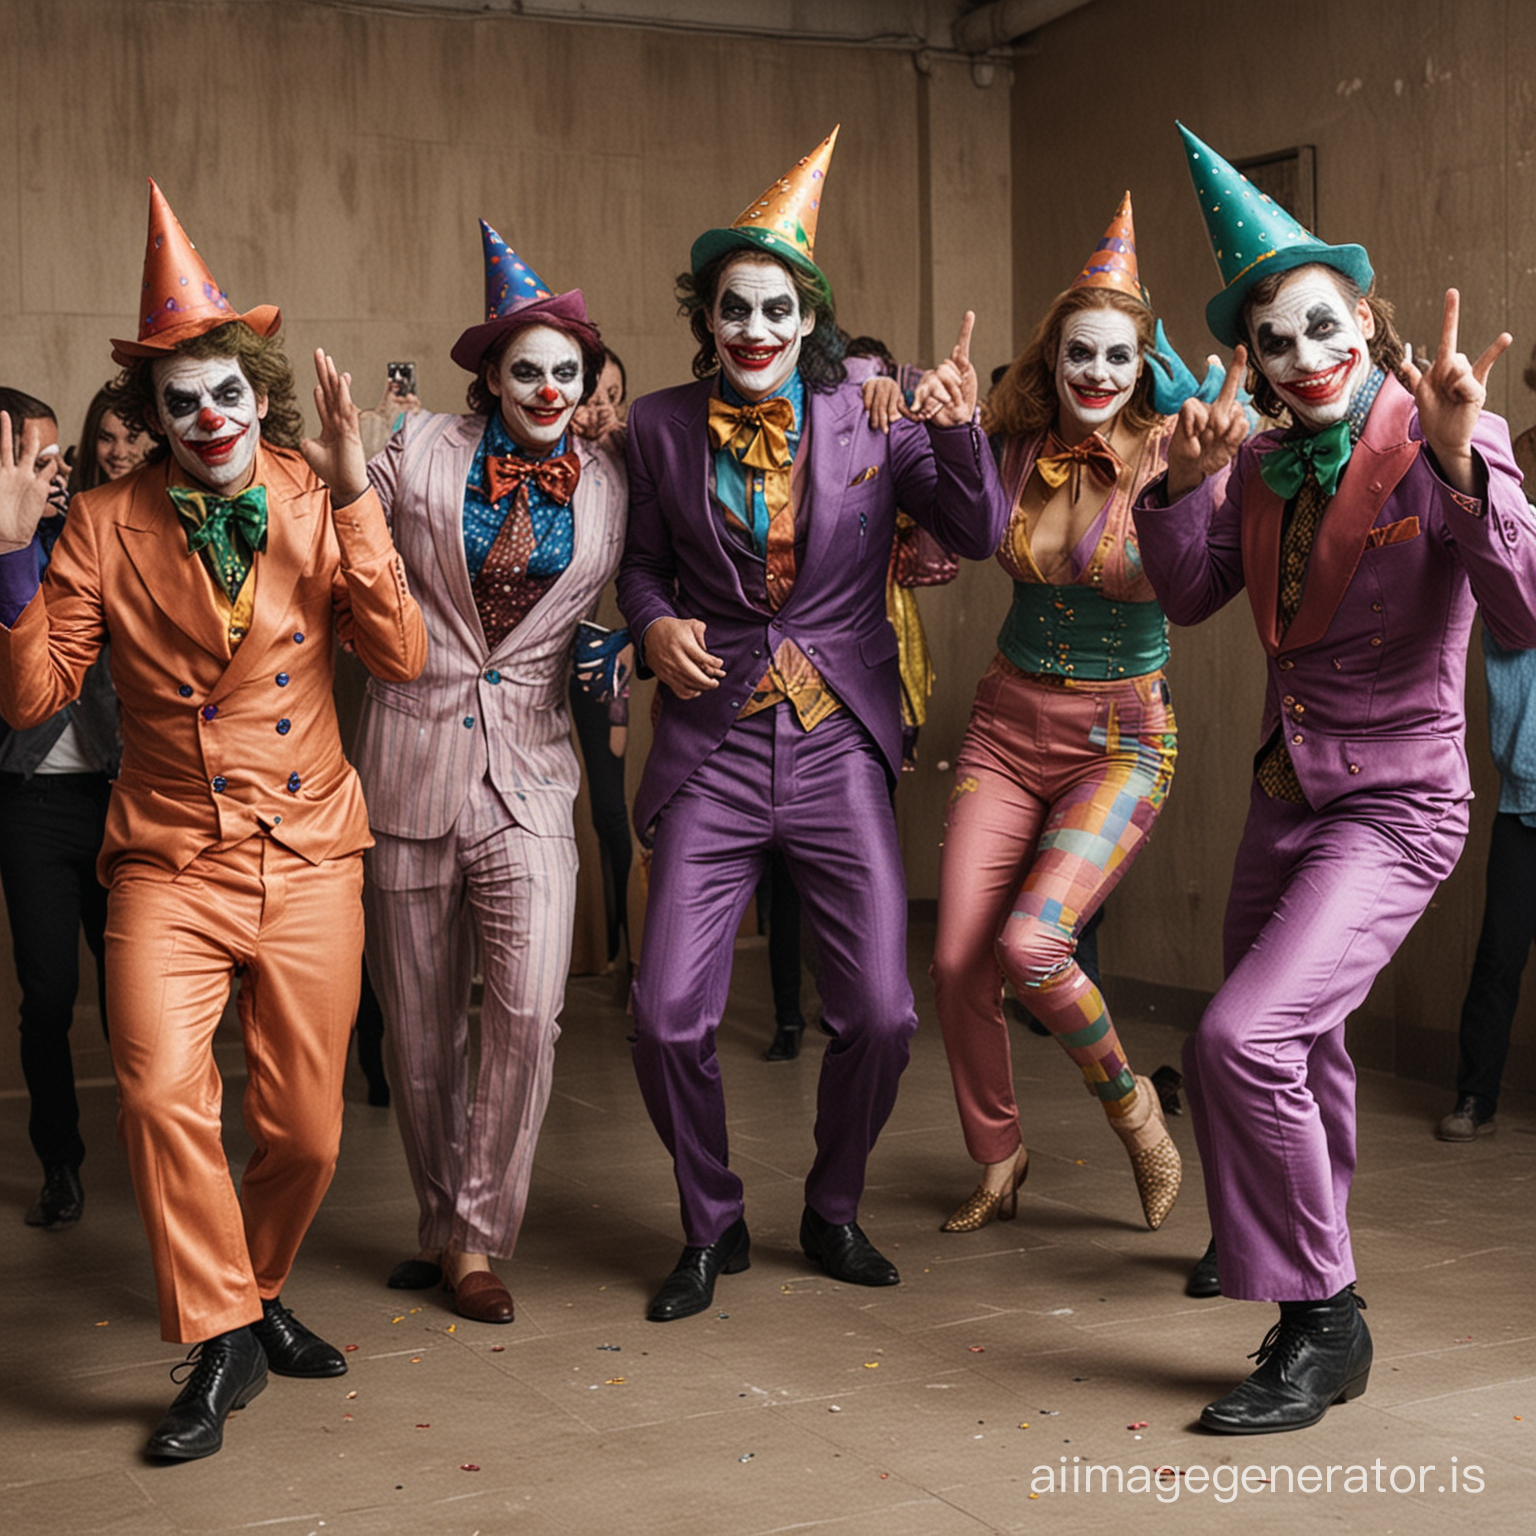 humans disguised as jokers dancing in a birthday of ugly womens